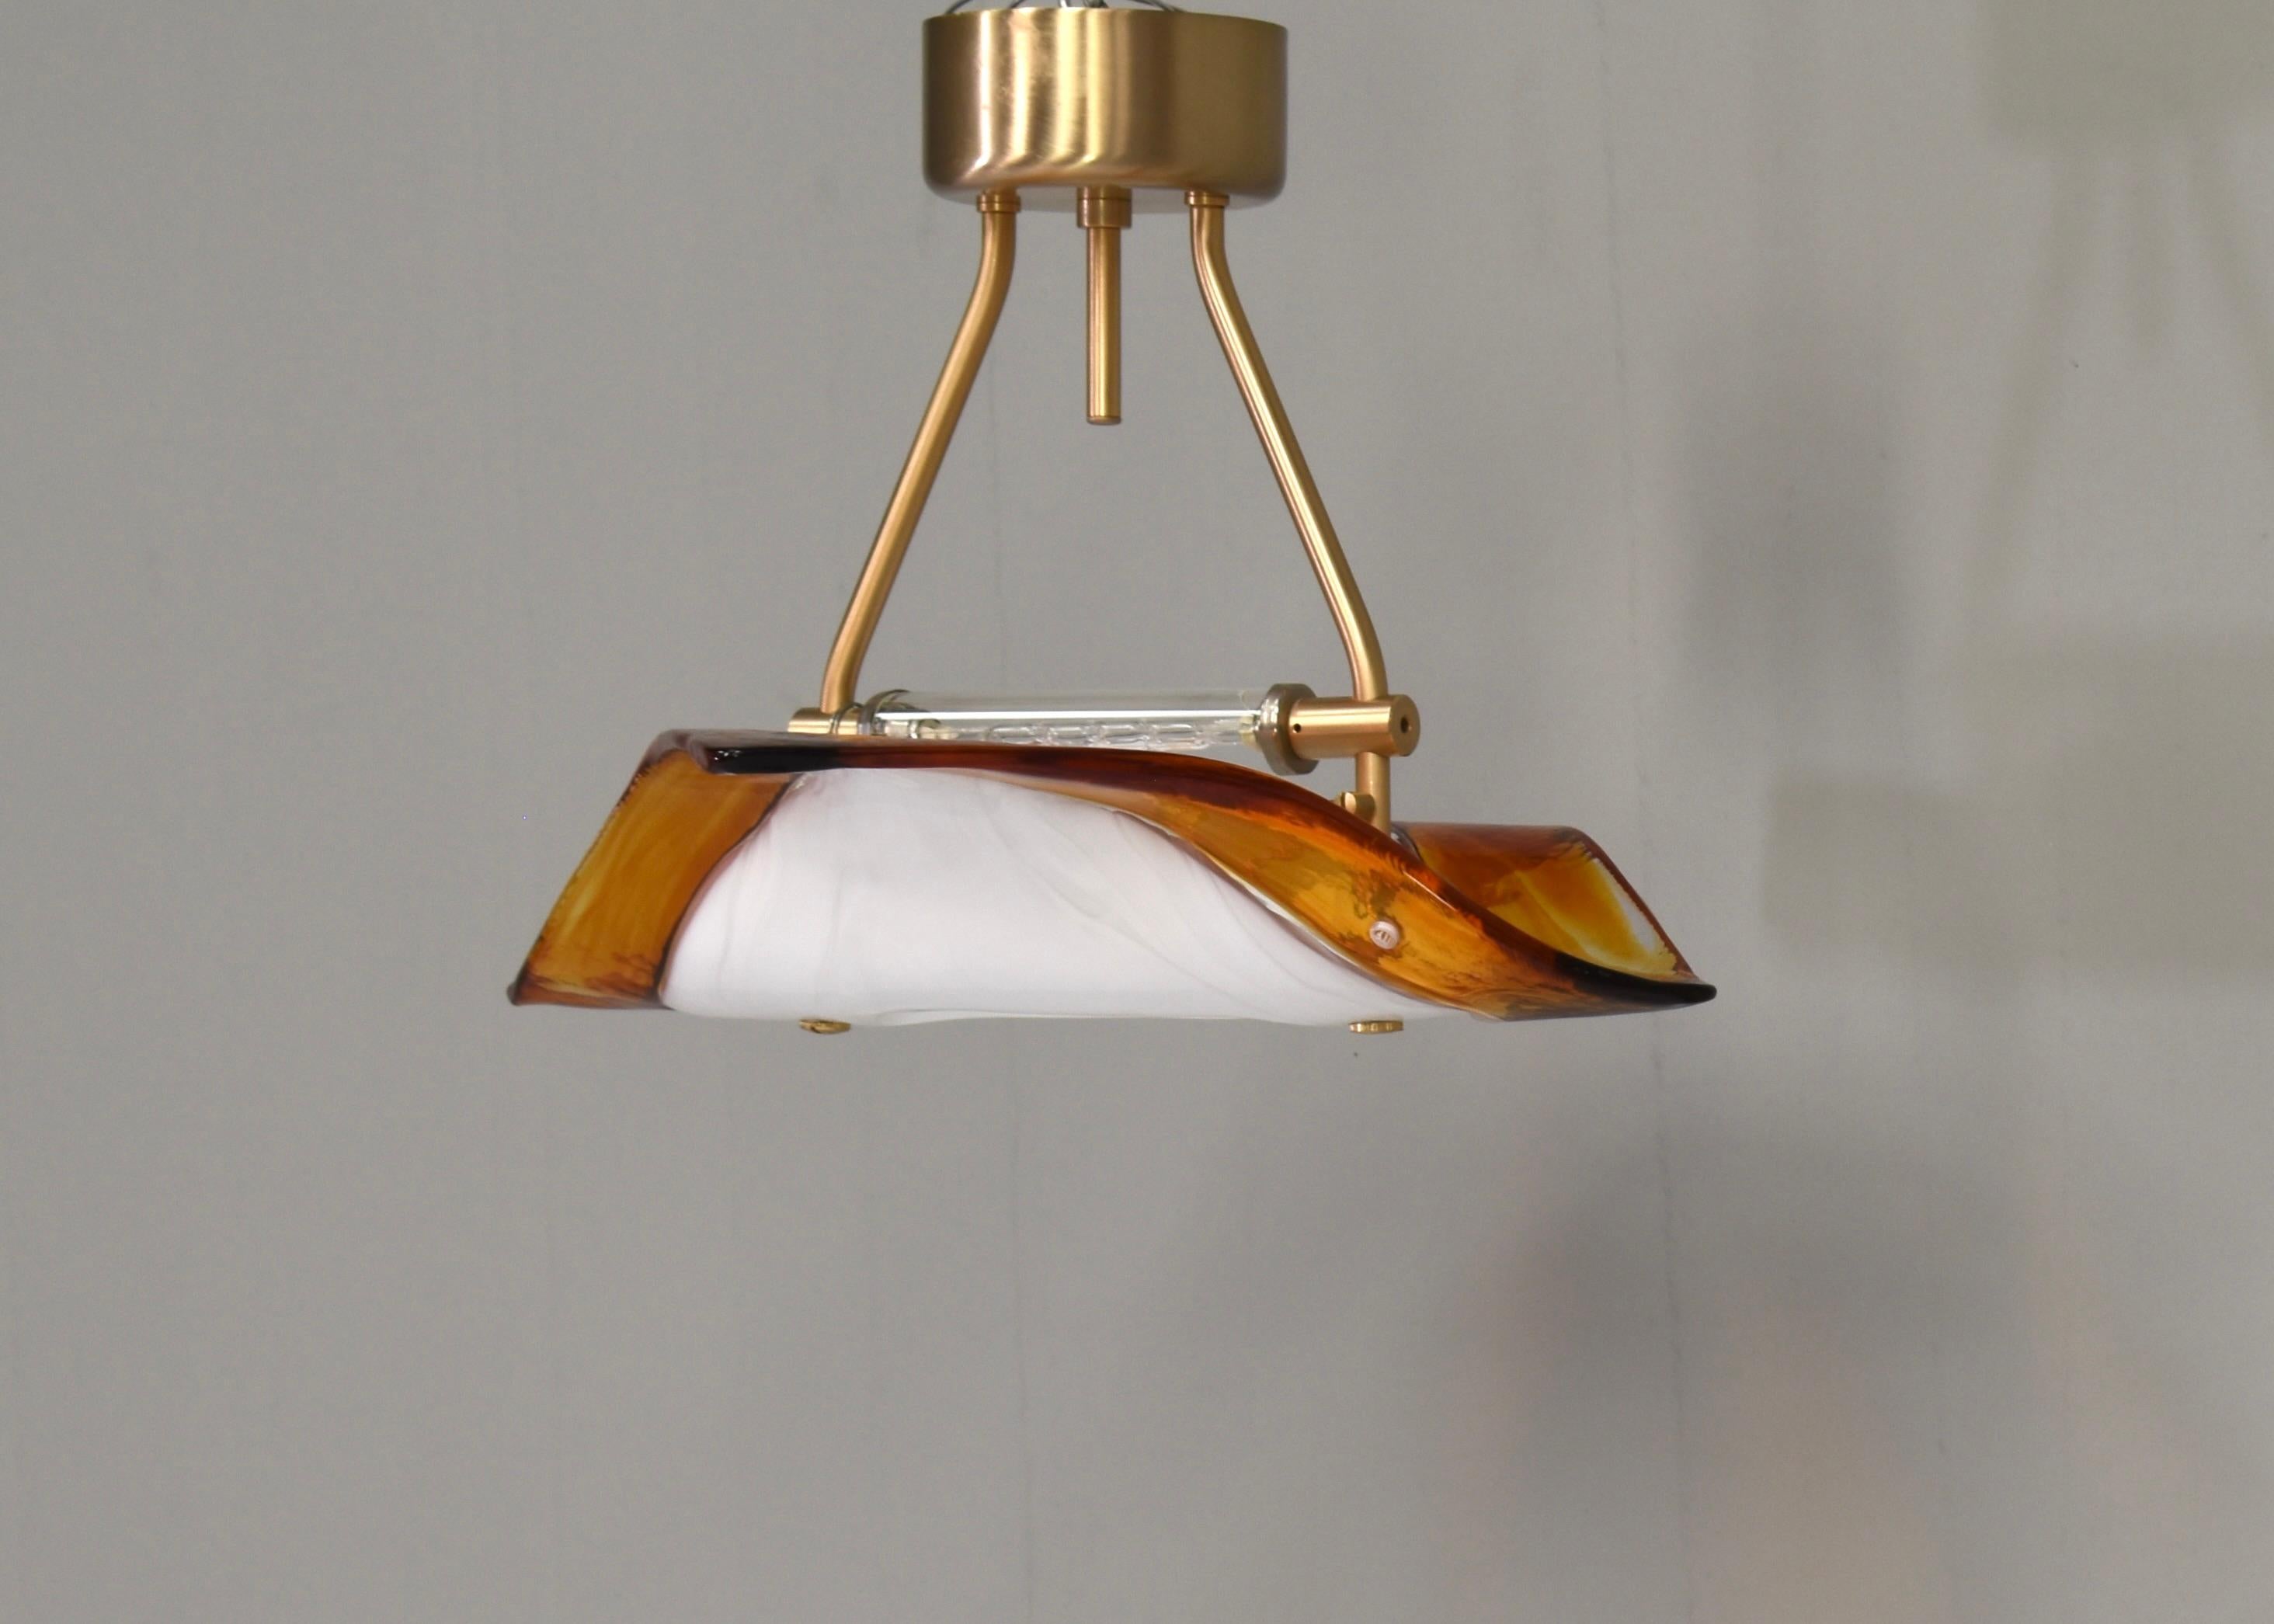 Murano glass ceiling lamp, model Albatros by La Murrina.
The lamp is labeled La Murrina, Albatros and has a stamp in the glass and is in amazing condition.
We also have a matching pendant lamp available.

Manufacturer: La Murrina (labeled)
Country: